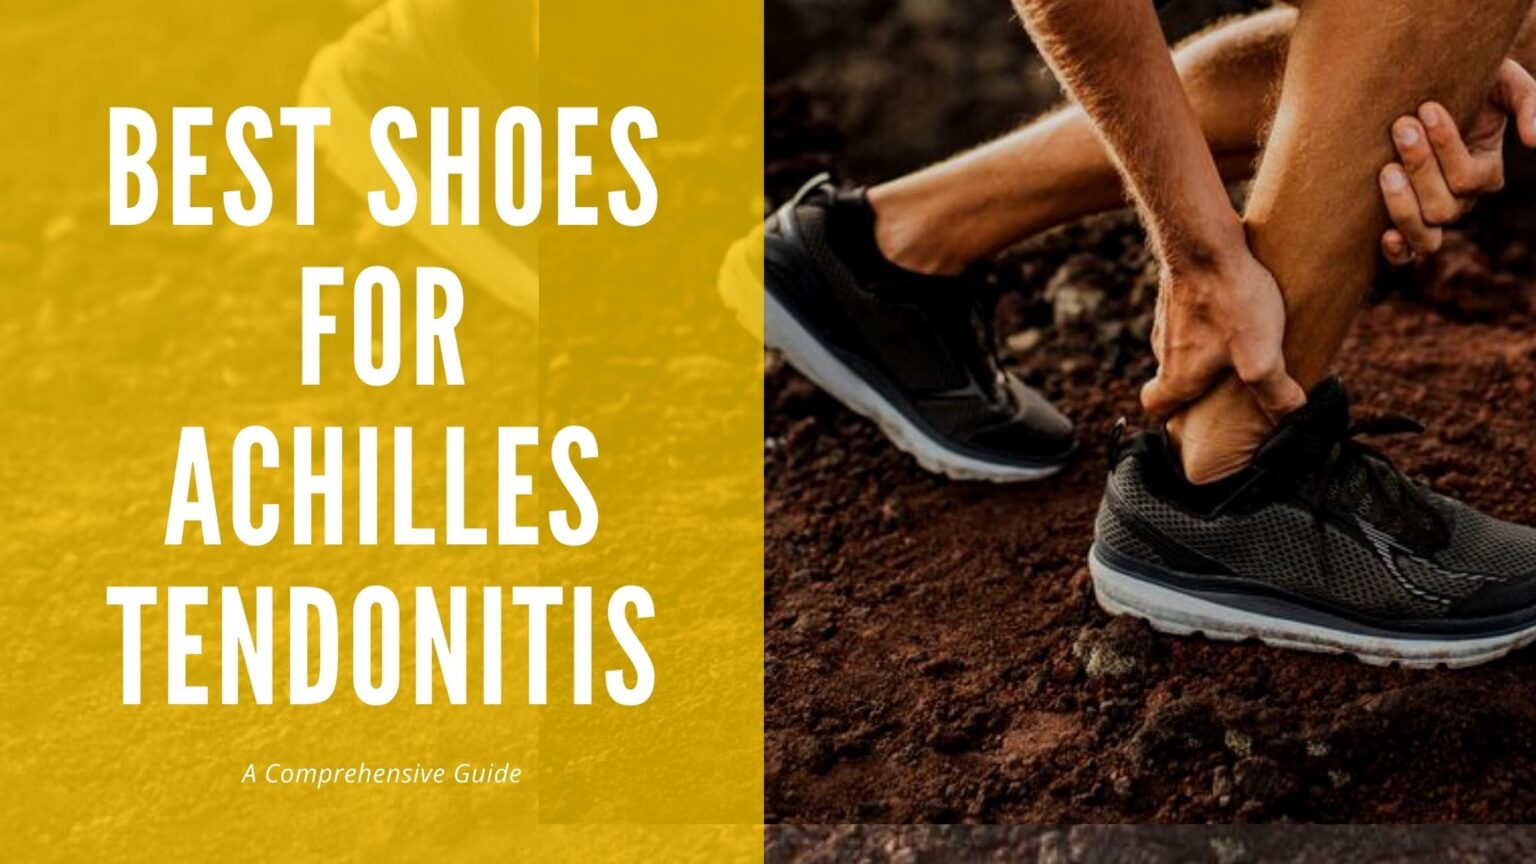 The Best Shoes For Achilles Tendonitis A Comprehensive Guide